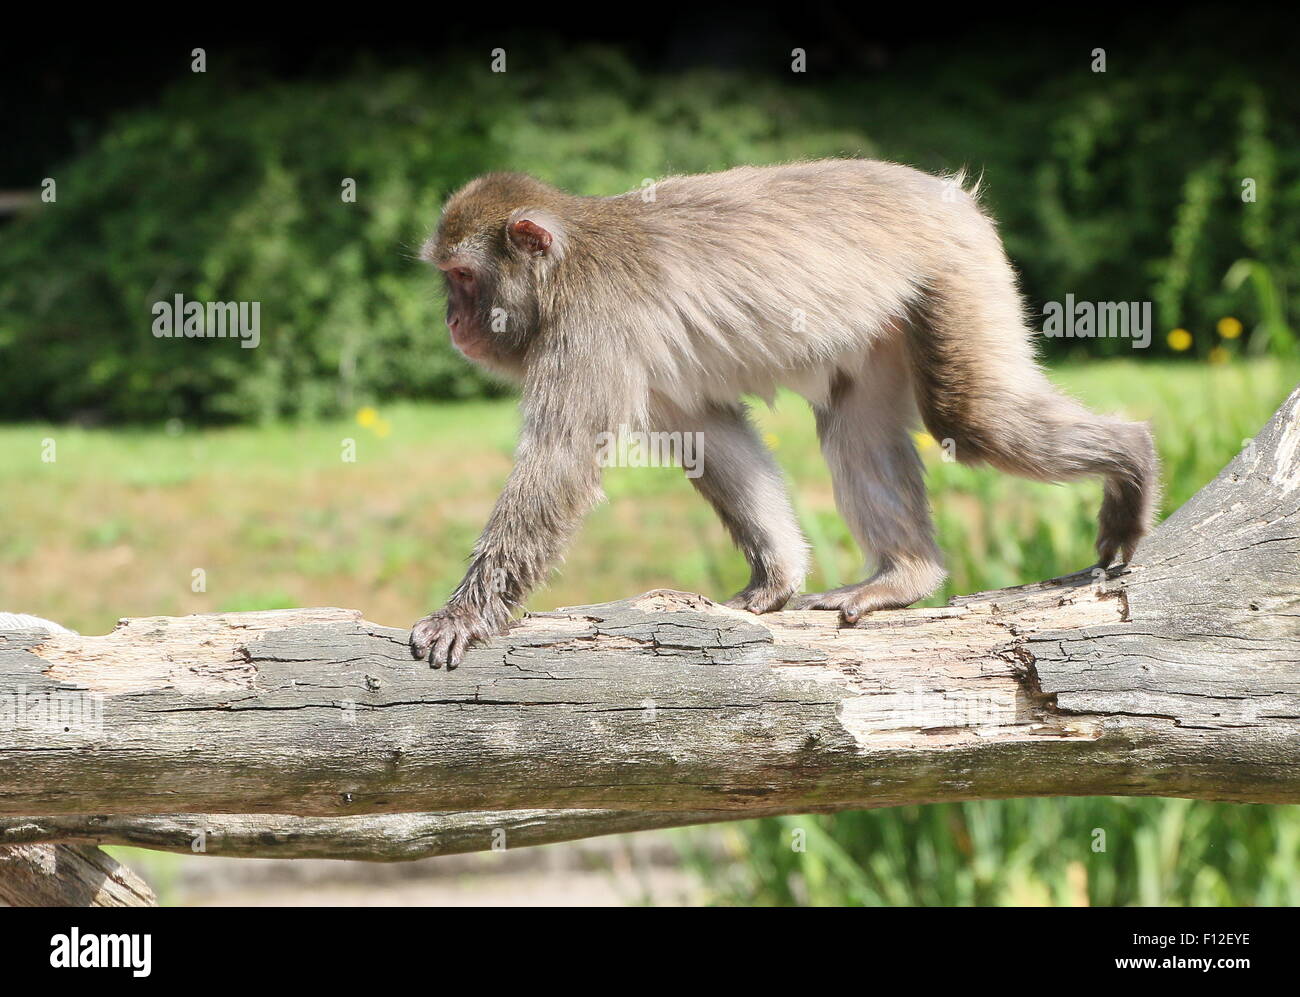 Japanese macaque or Snow monkey (Macaca fuscata) walking on a branch, seen in profile Stock Photo